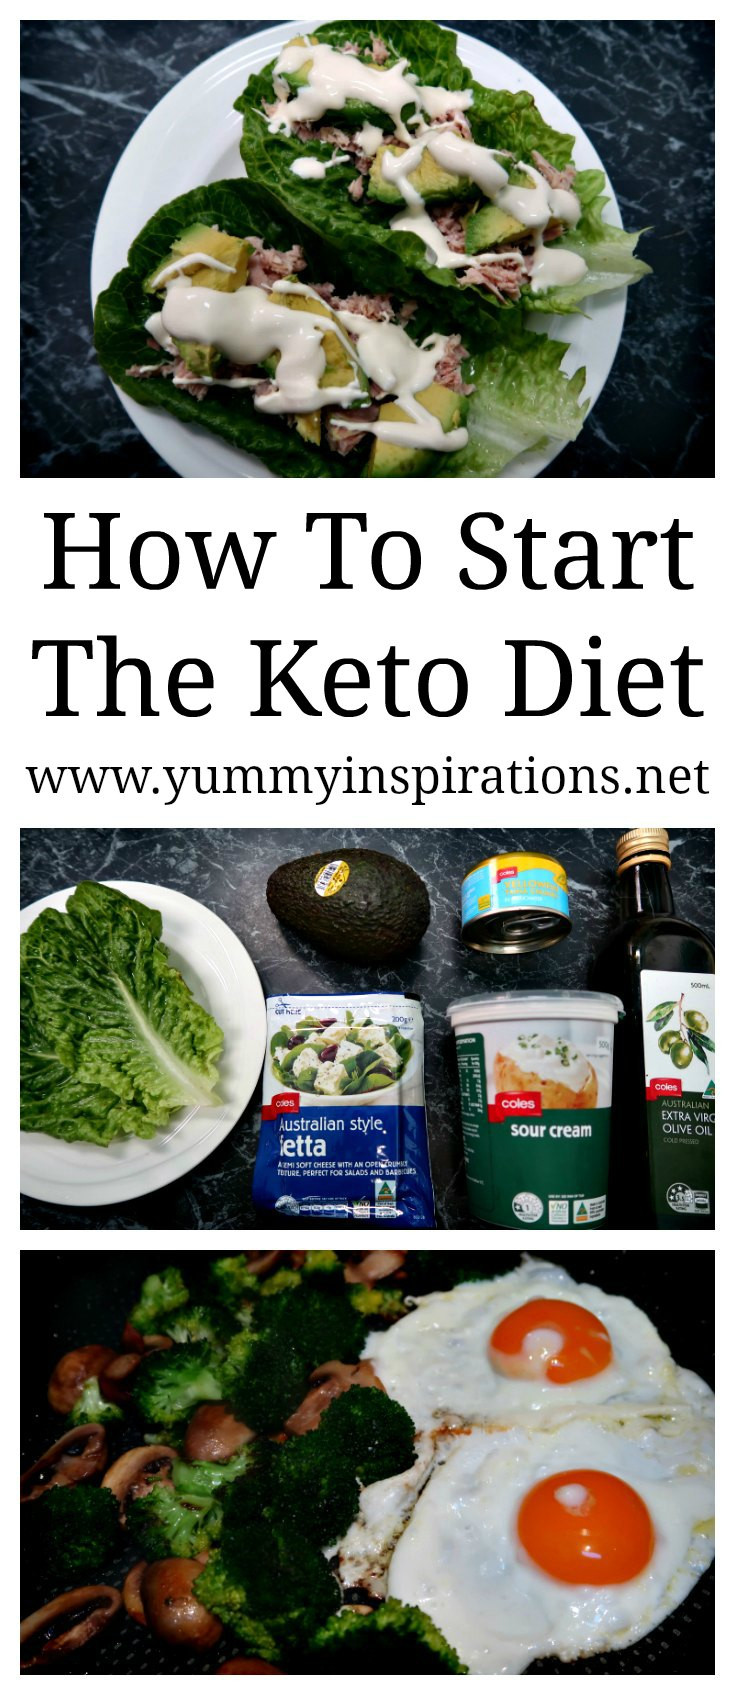 How To Lose Weight On Keto
 How To Start The Keto Diet Tips to help you started